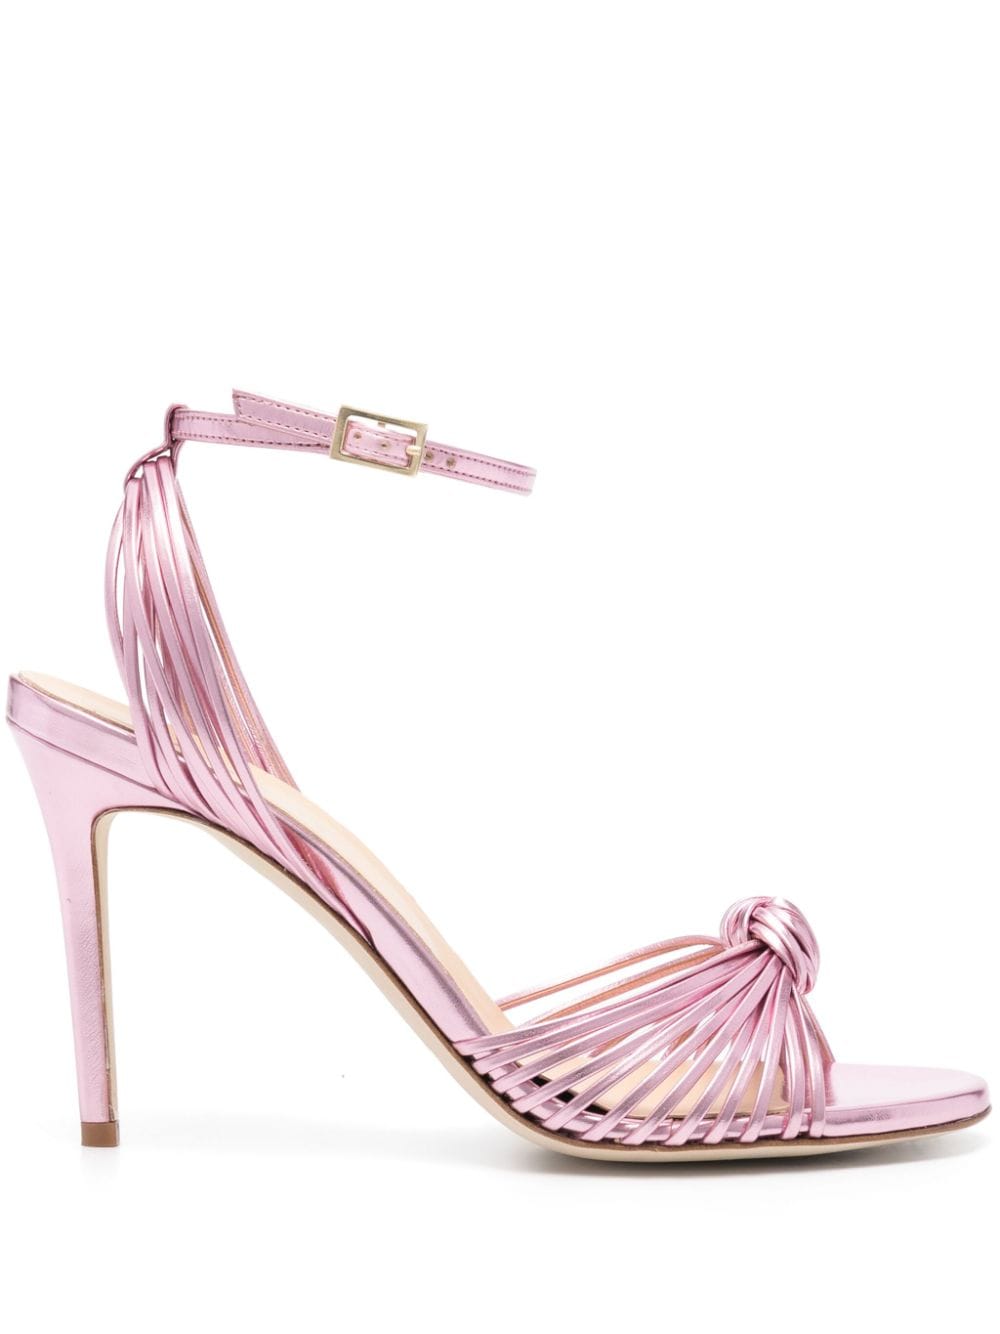 Semicouture 95mm knot detail sandals - Pink von Semicouture